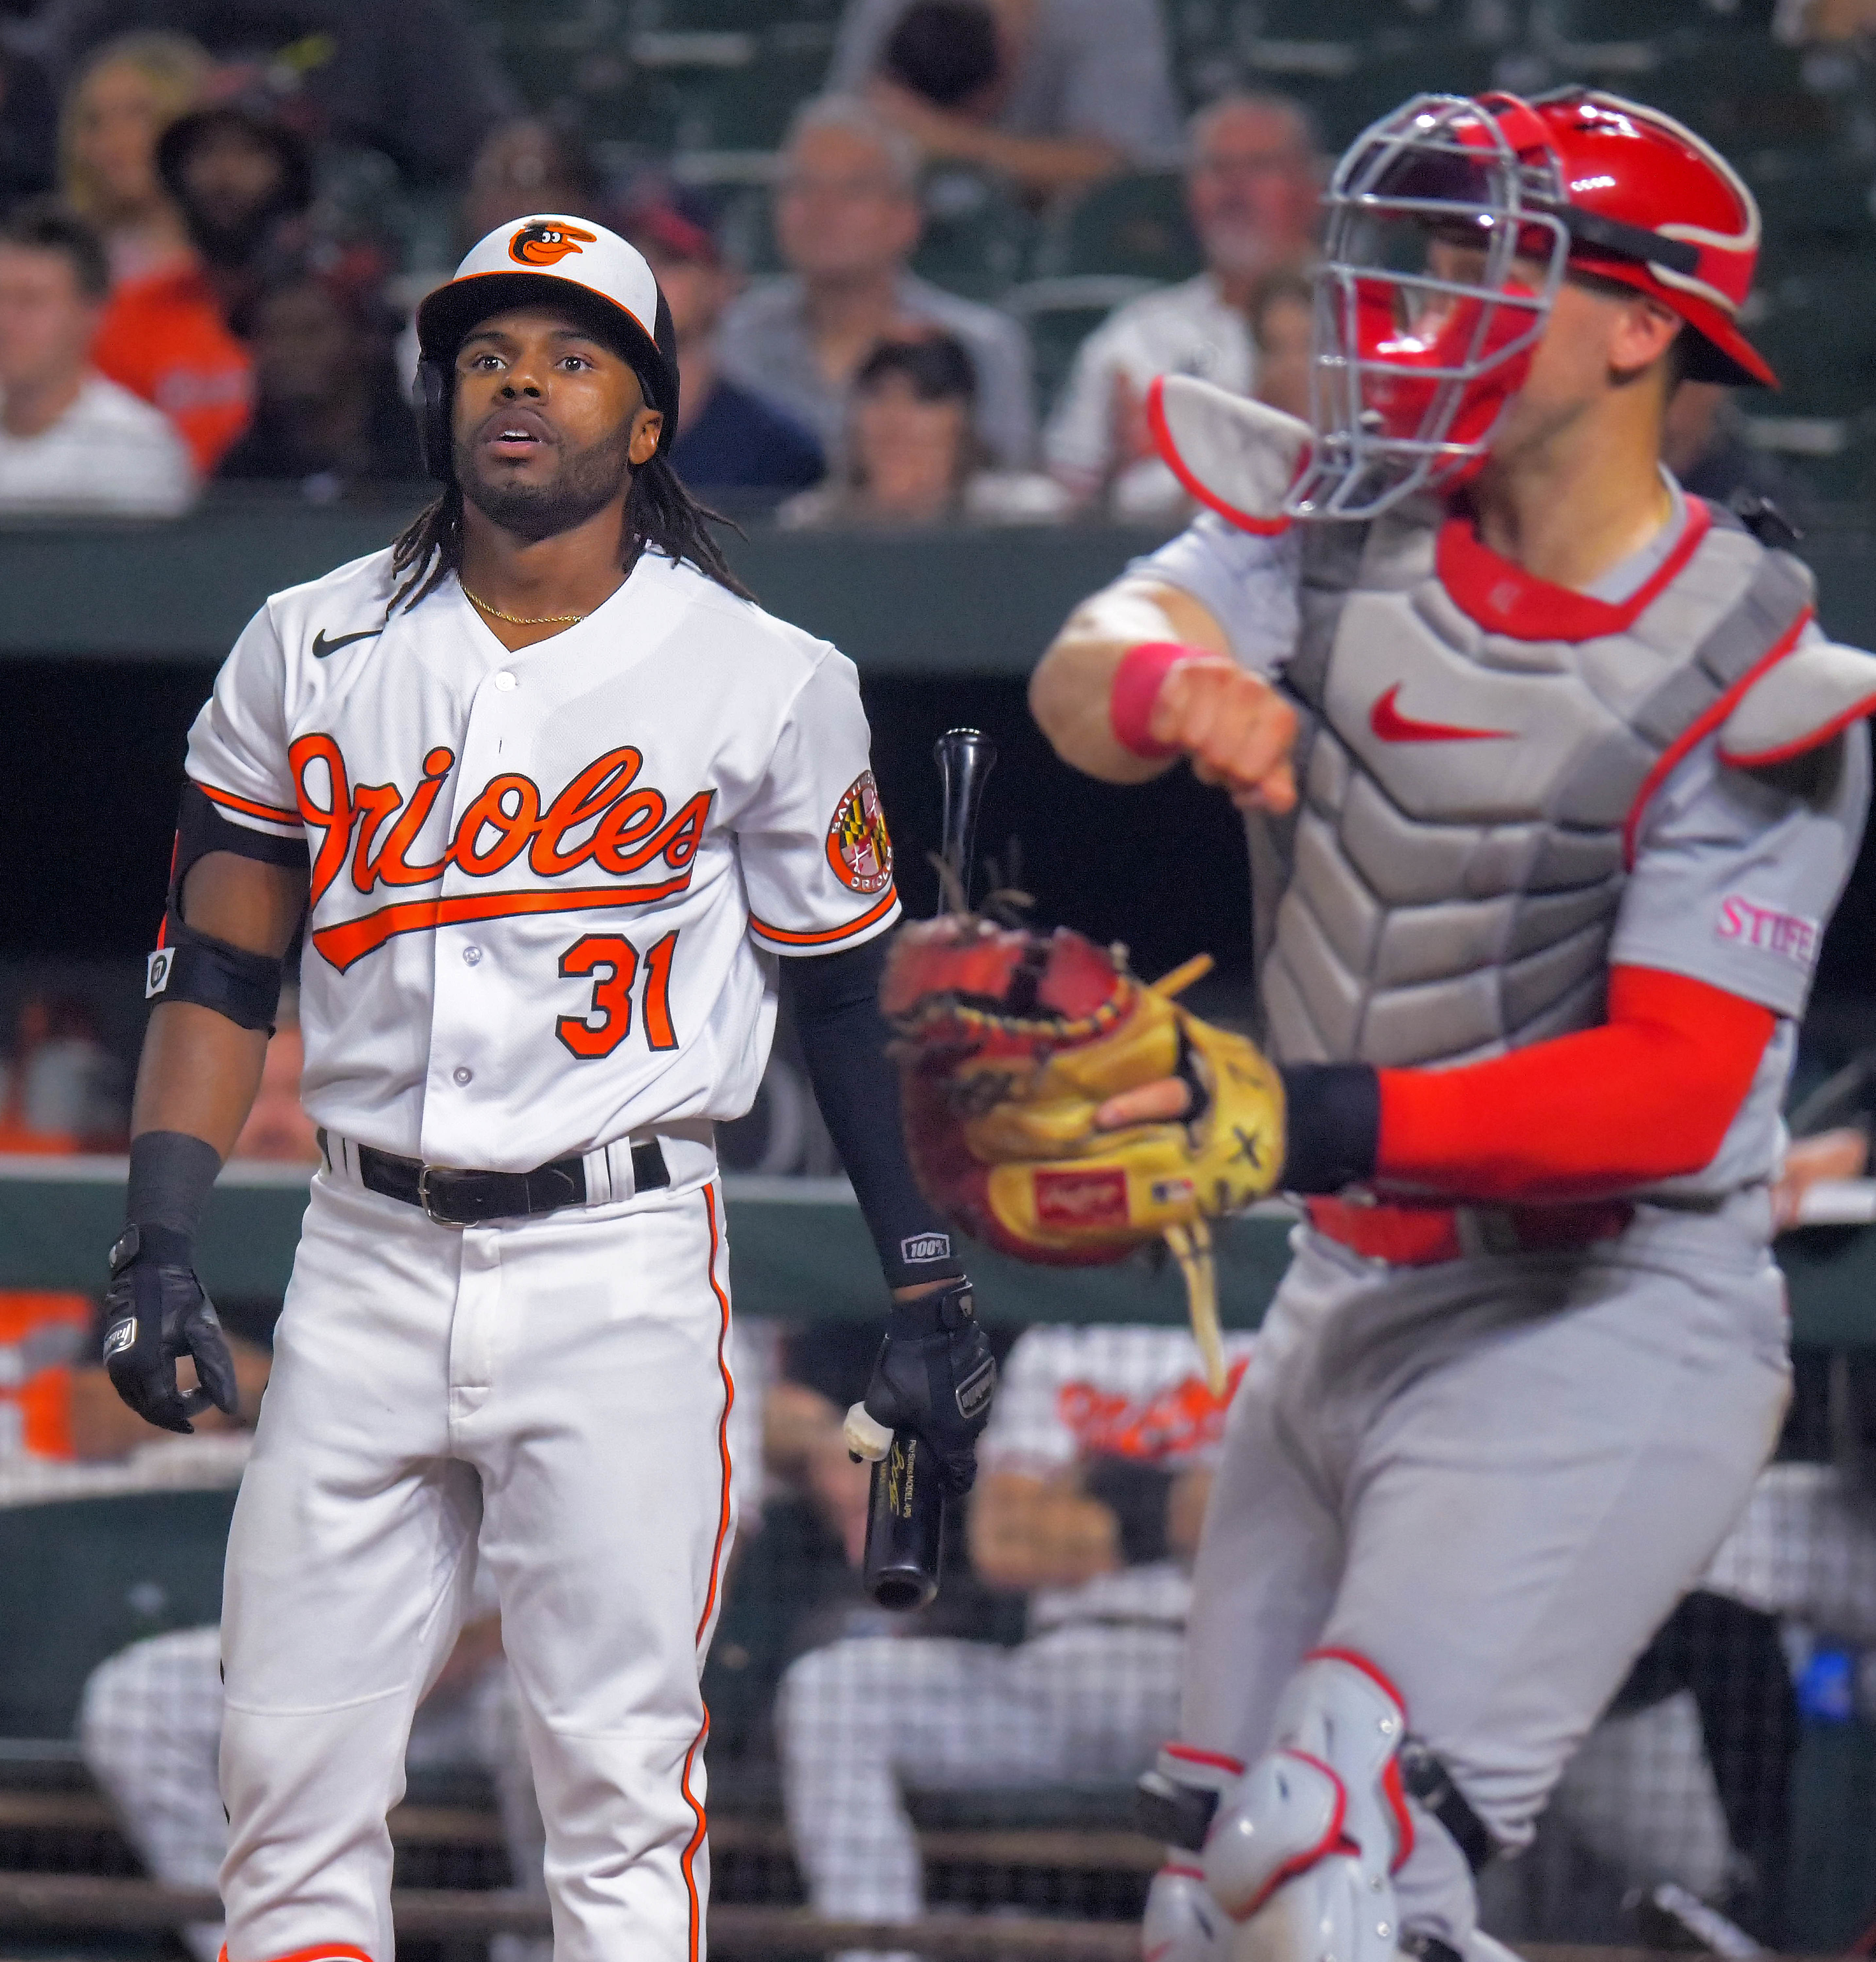 Orioles' offense quiet again in 1-0 loss to Cardinals, leaving AL East lead  at 2 entering Rays series